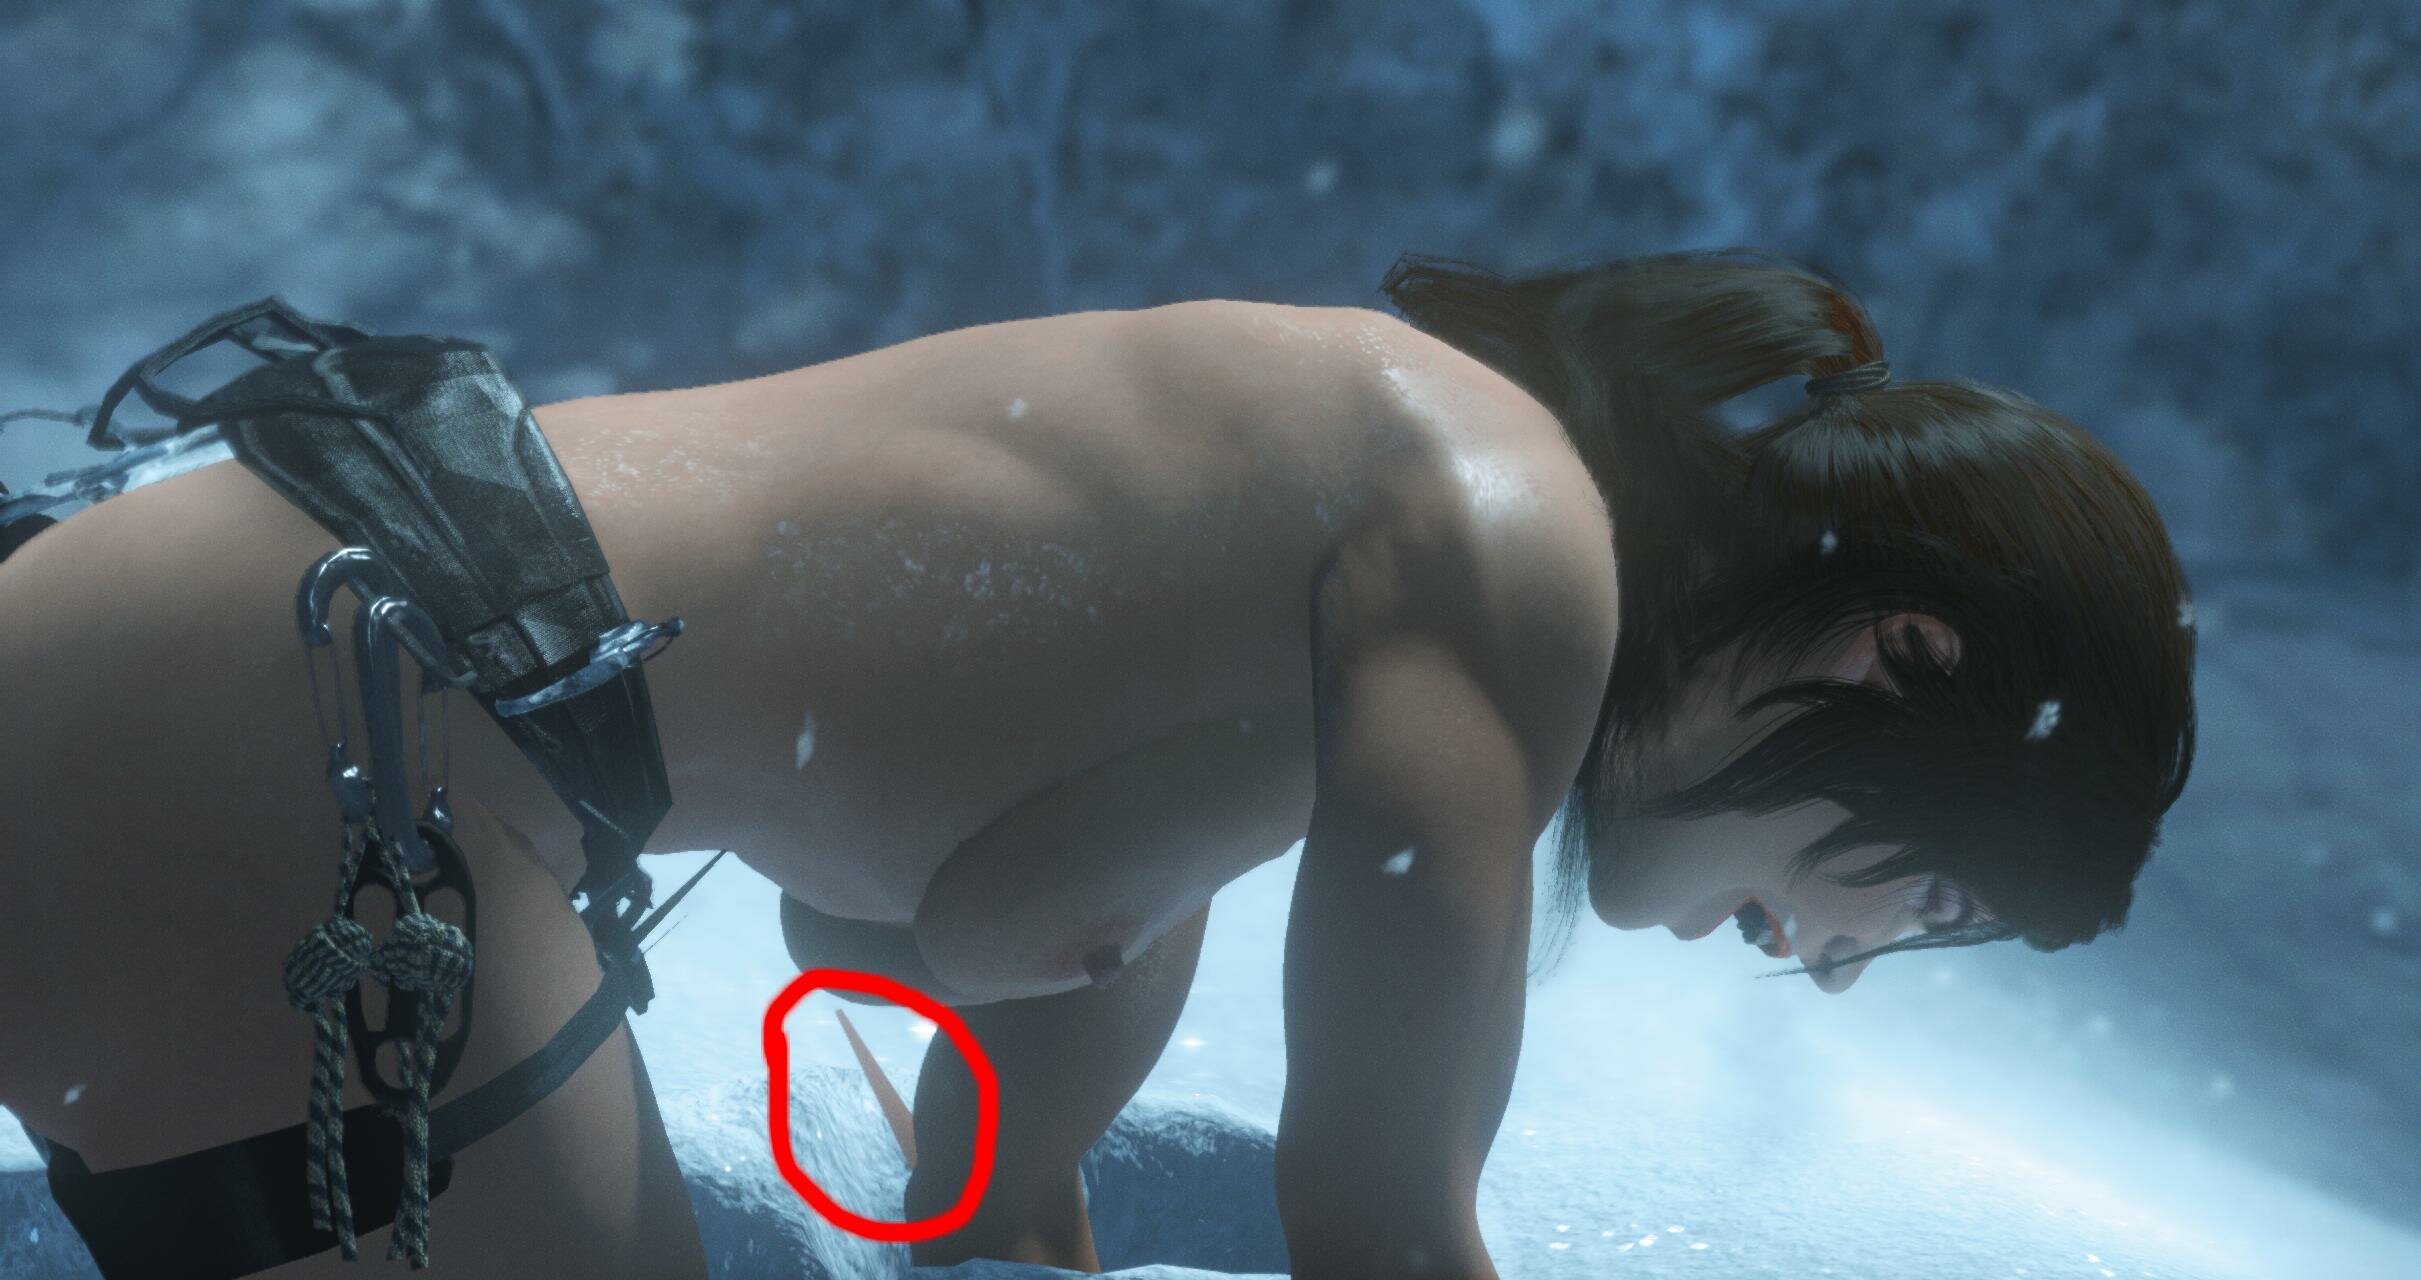 Rise of the Tomb Raider Lara nude mod - Page 27 - Adult Gaming - LoversLab.